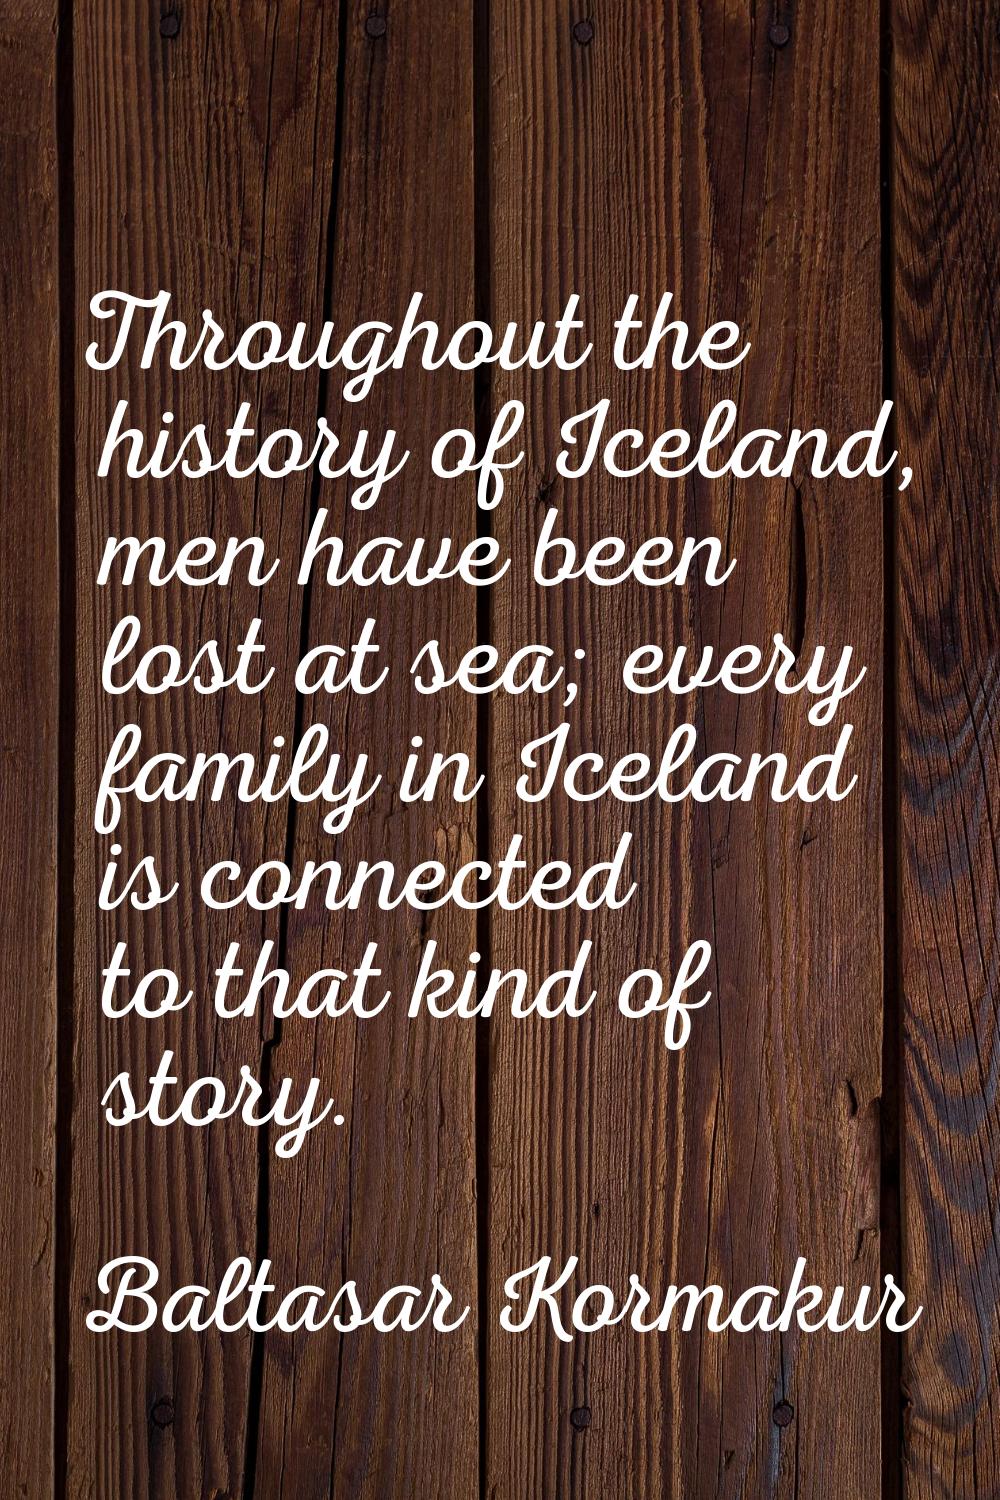 Throughout the history of Iceland, men have been lost at sea; every family in Iceland is connected 